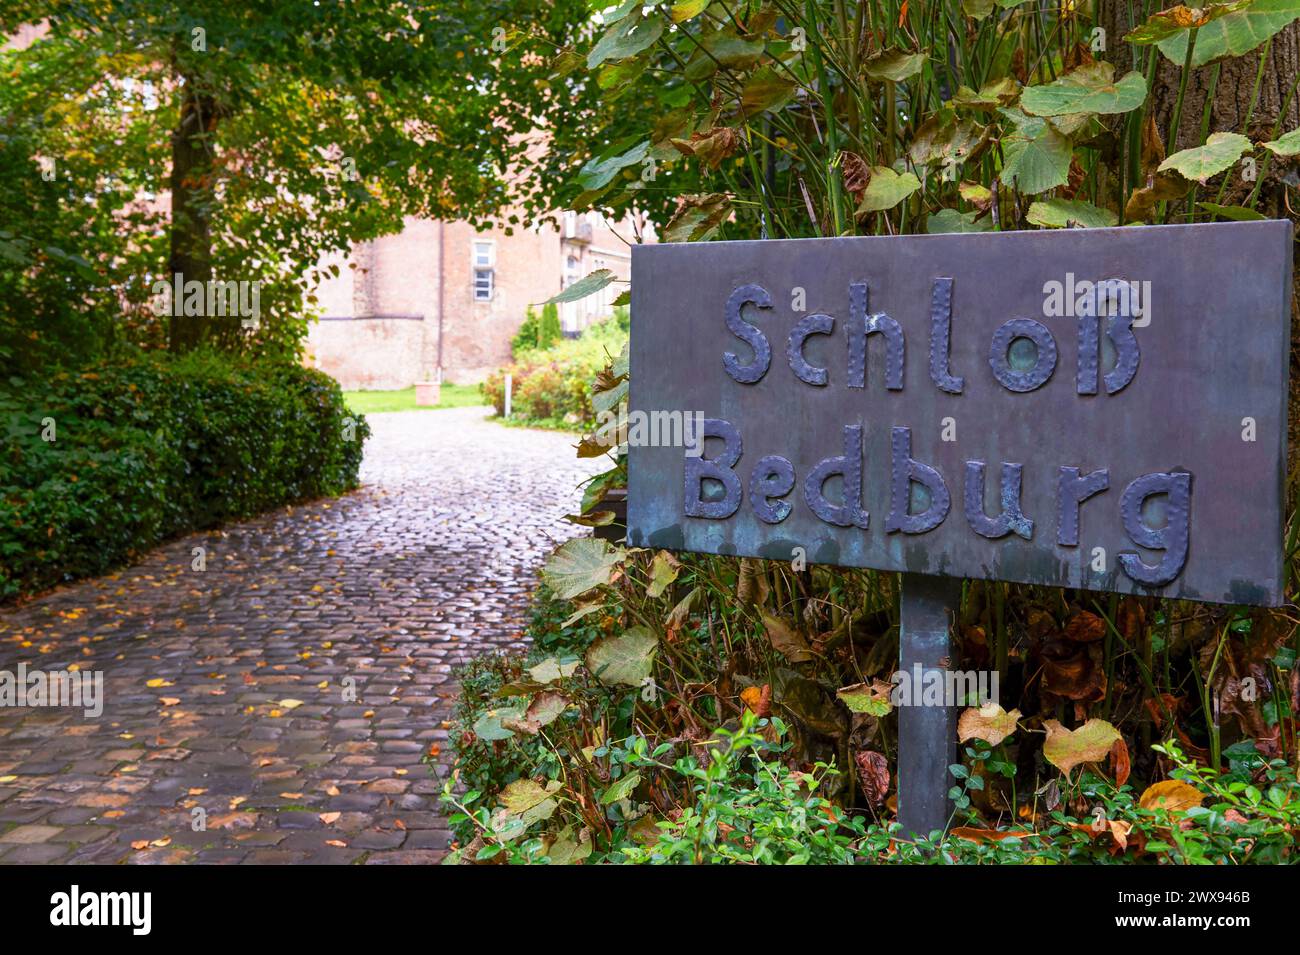 Visiting Bedburg castle in North Rhine-Westphalia, Germany on a rainy day Stock Photo